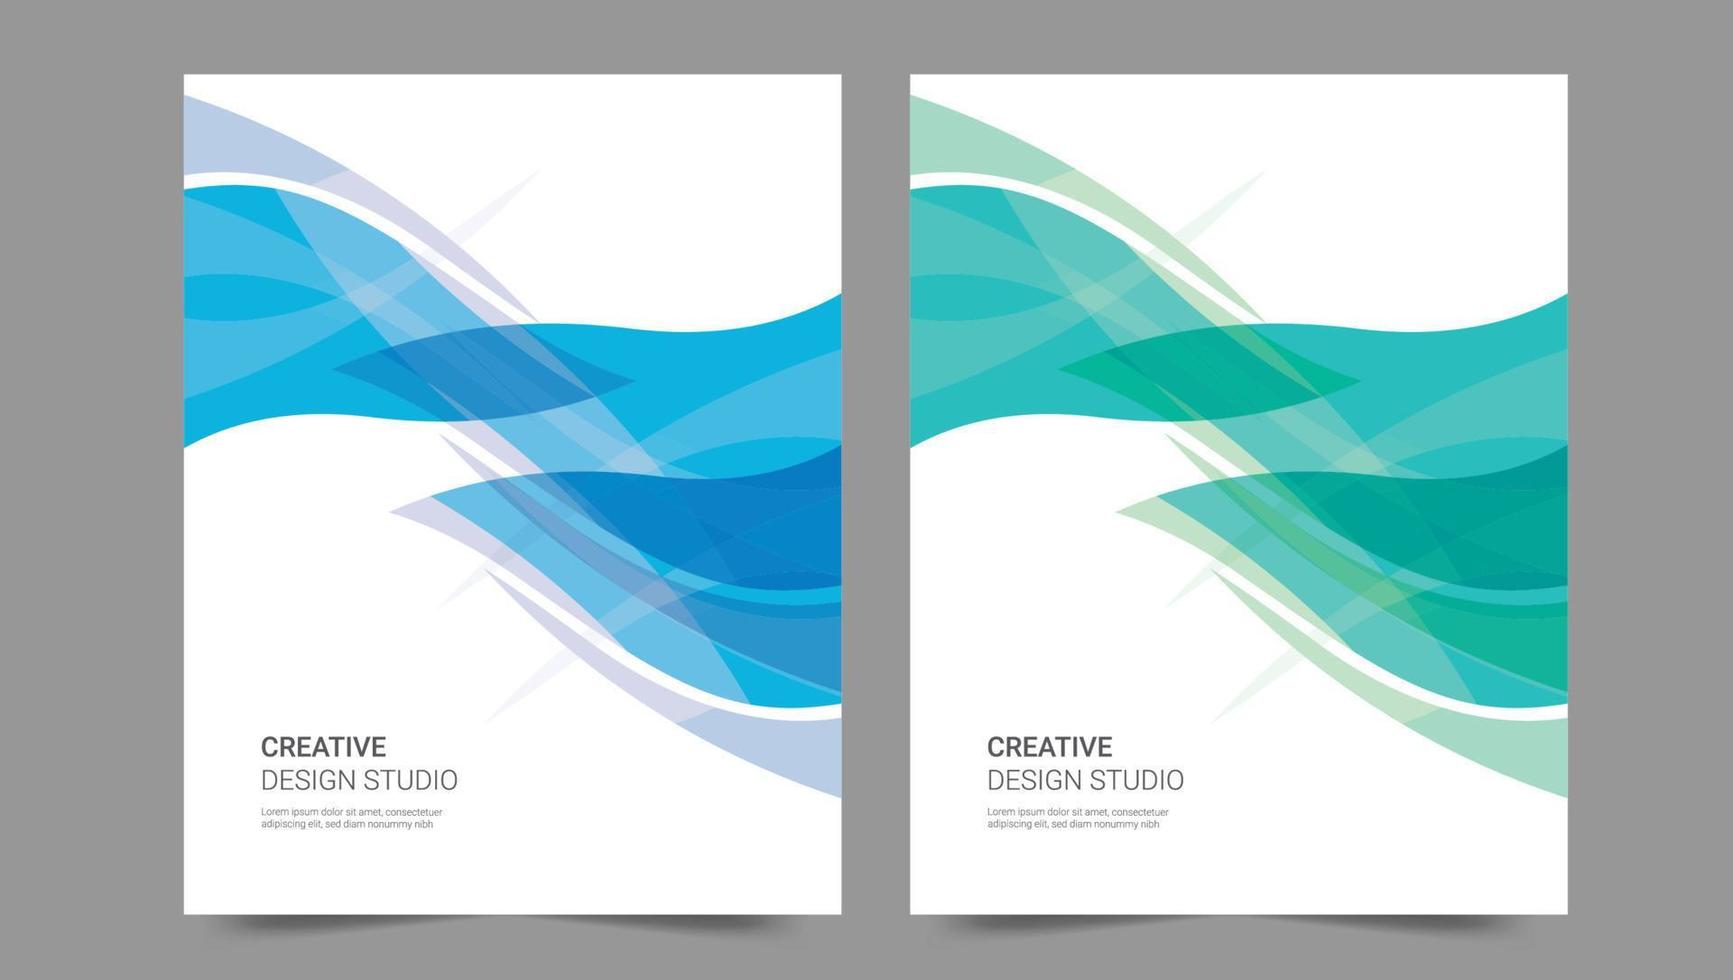 Cover template flyer design vector background